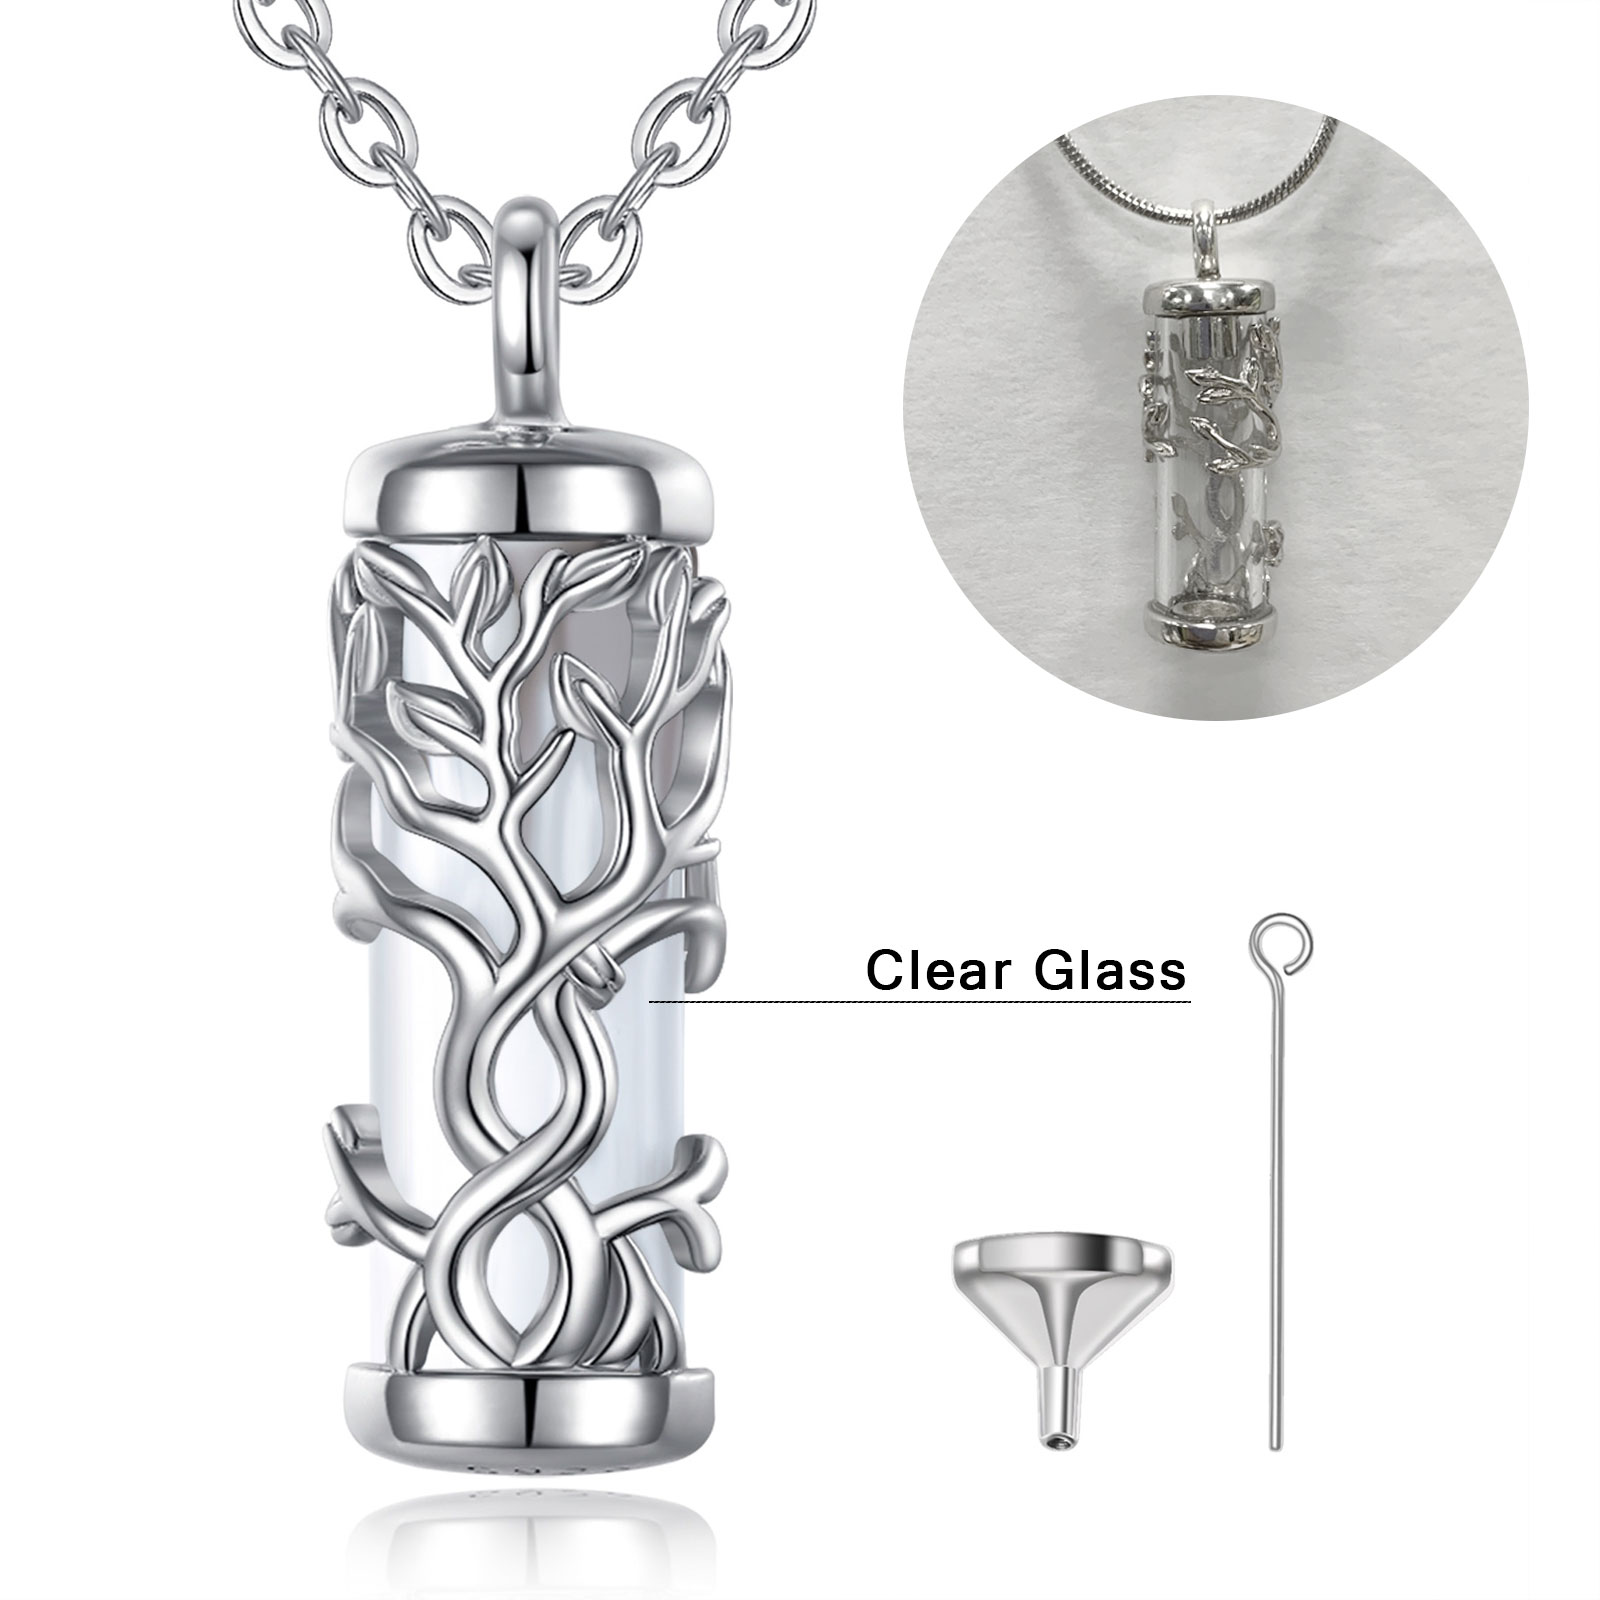 Merryshine s925 sterling silver cylinder tree of life keepsake ashes cremation urns pendant necklace for pet or human